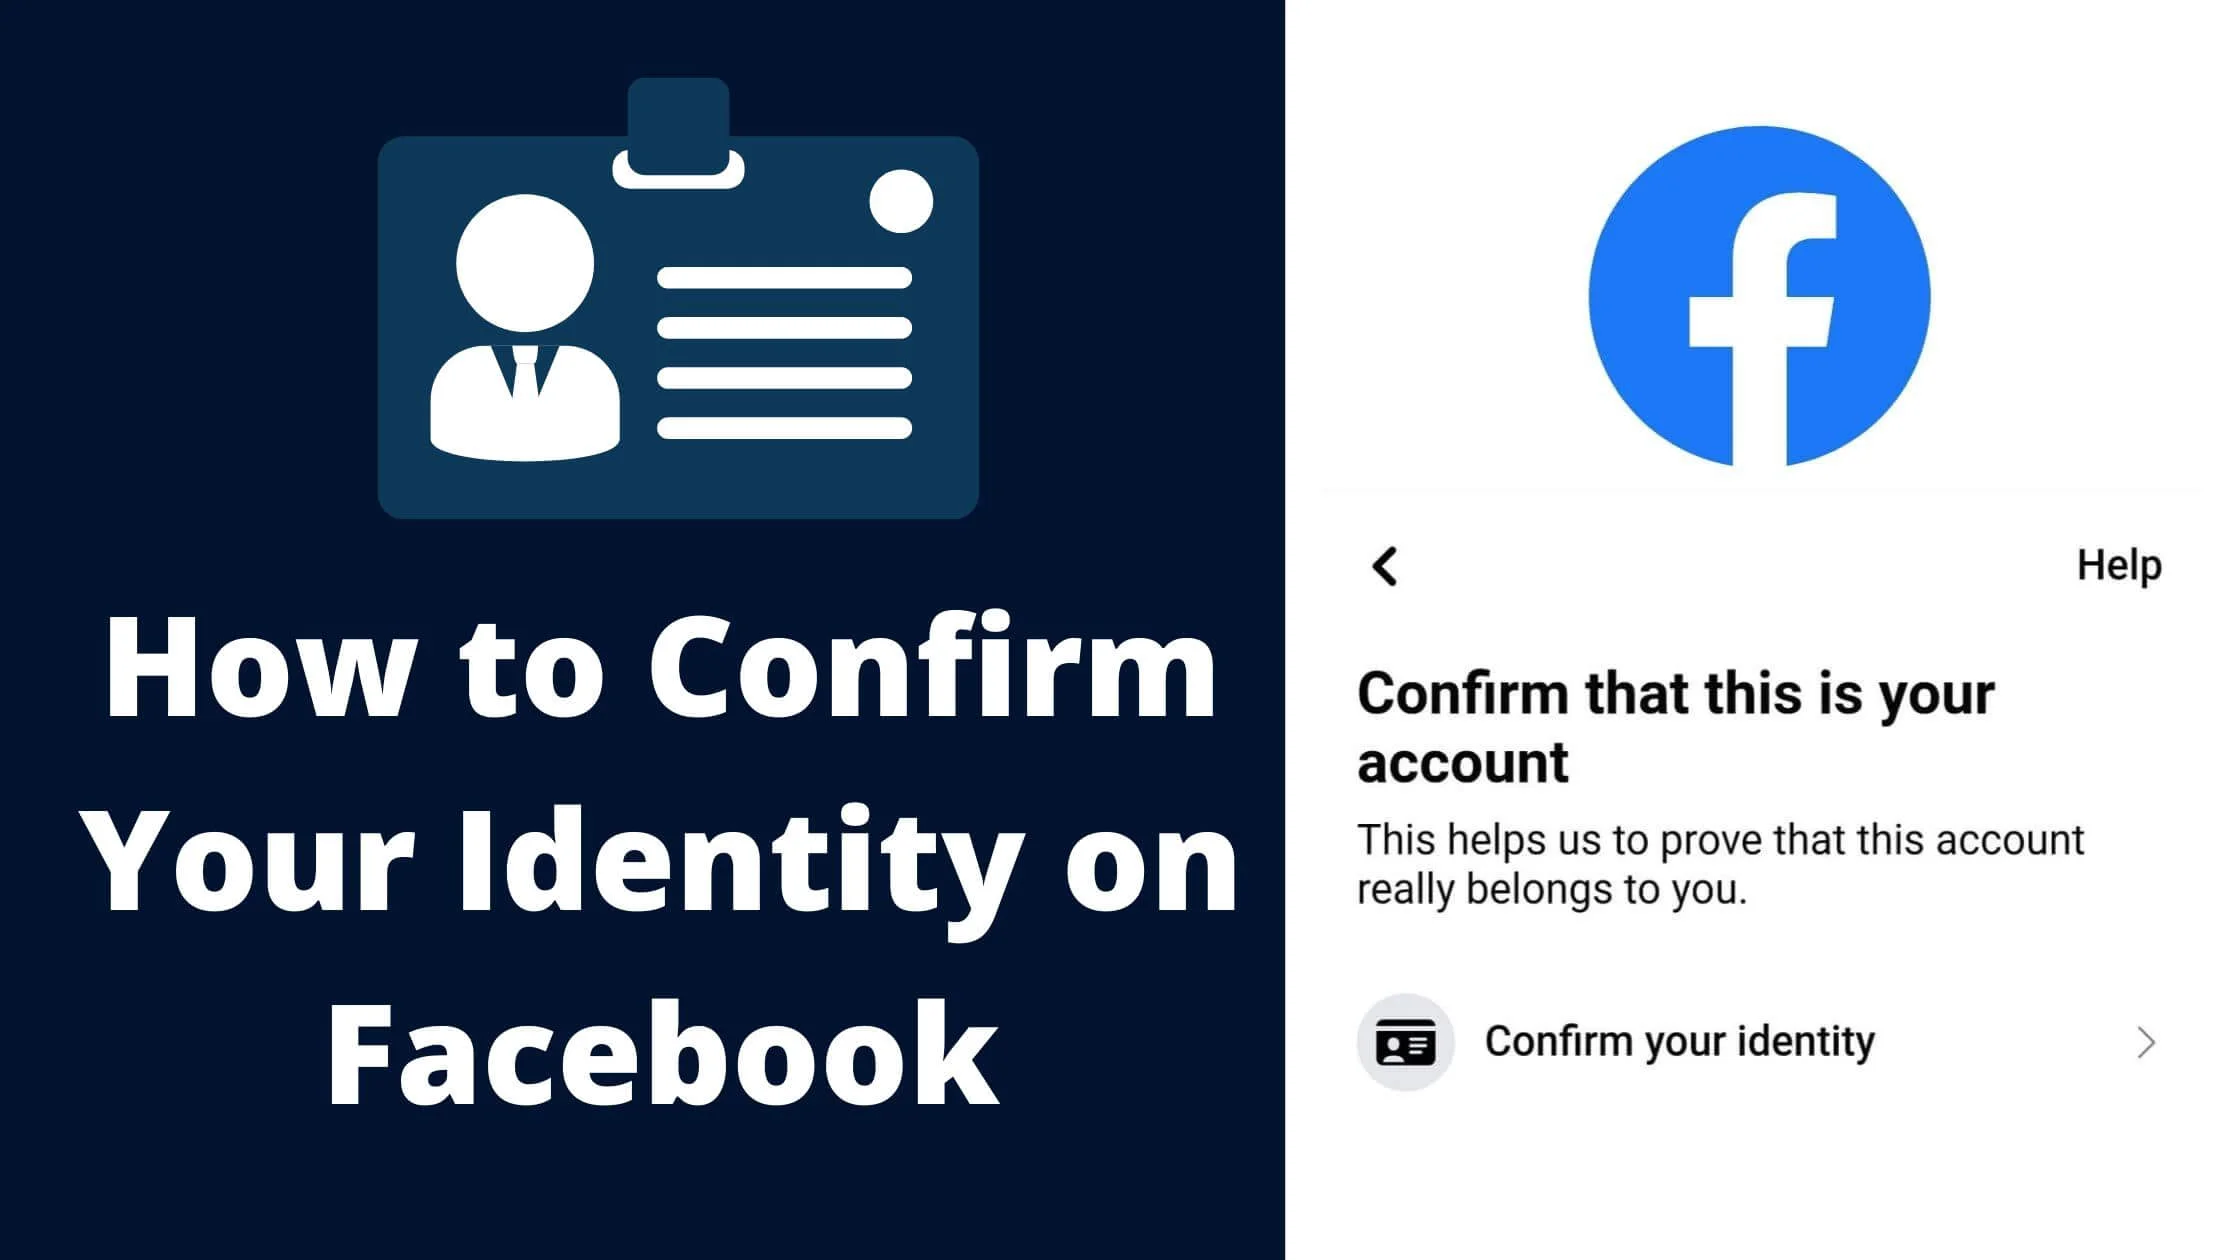 Confirm Your Identity on Facebook